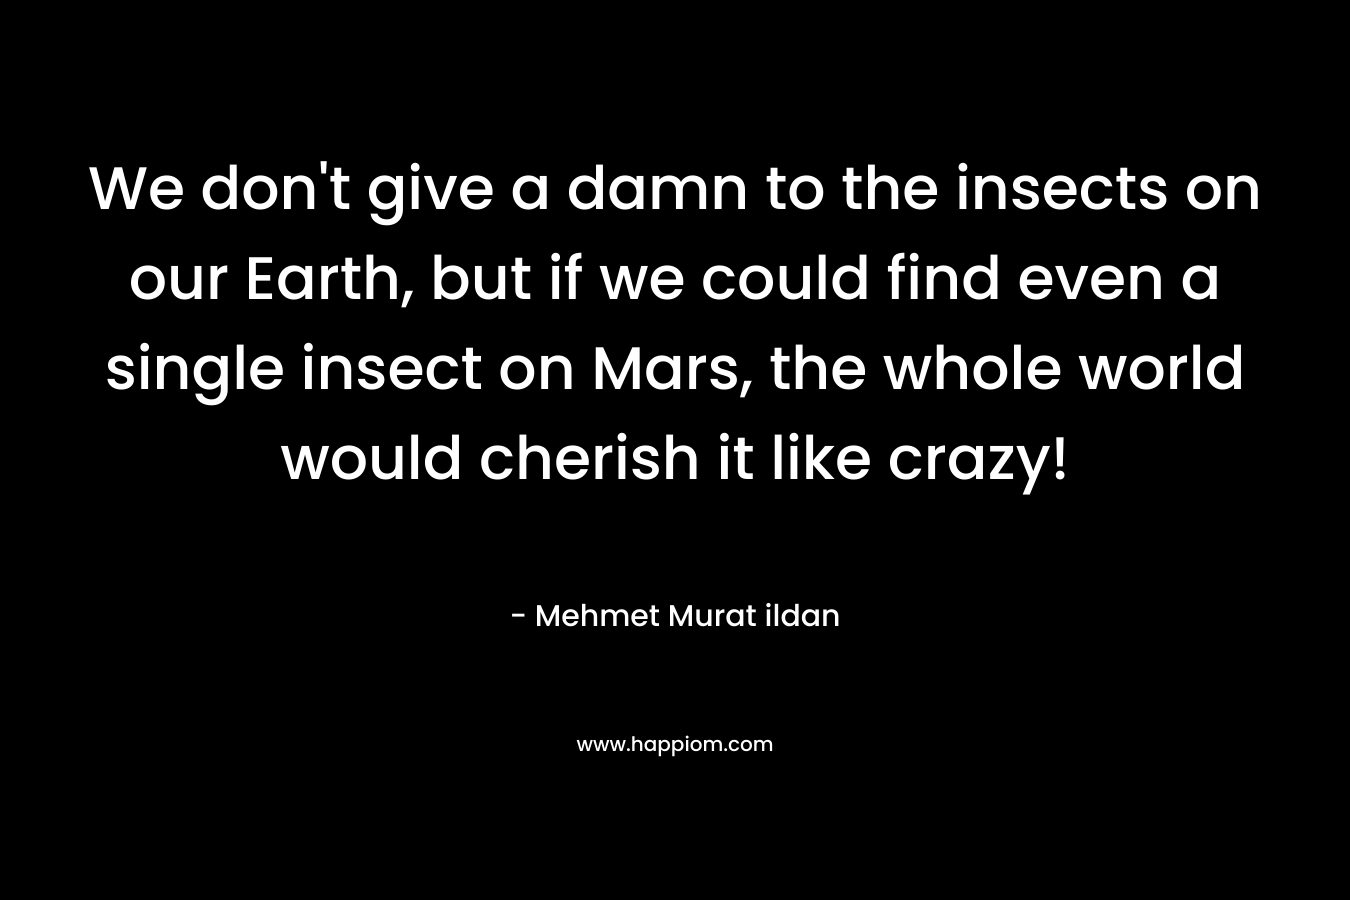 We don’t give a damn to the insects on our Earth, but if we could find even a single insect on Mars, the whole world would cherish it like crazy! – Mehmet Murat ildan